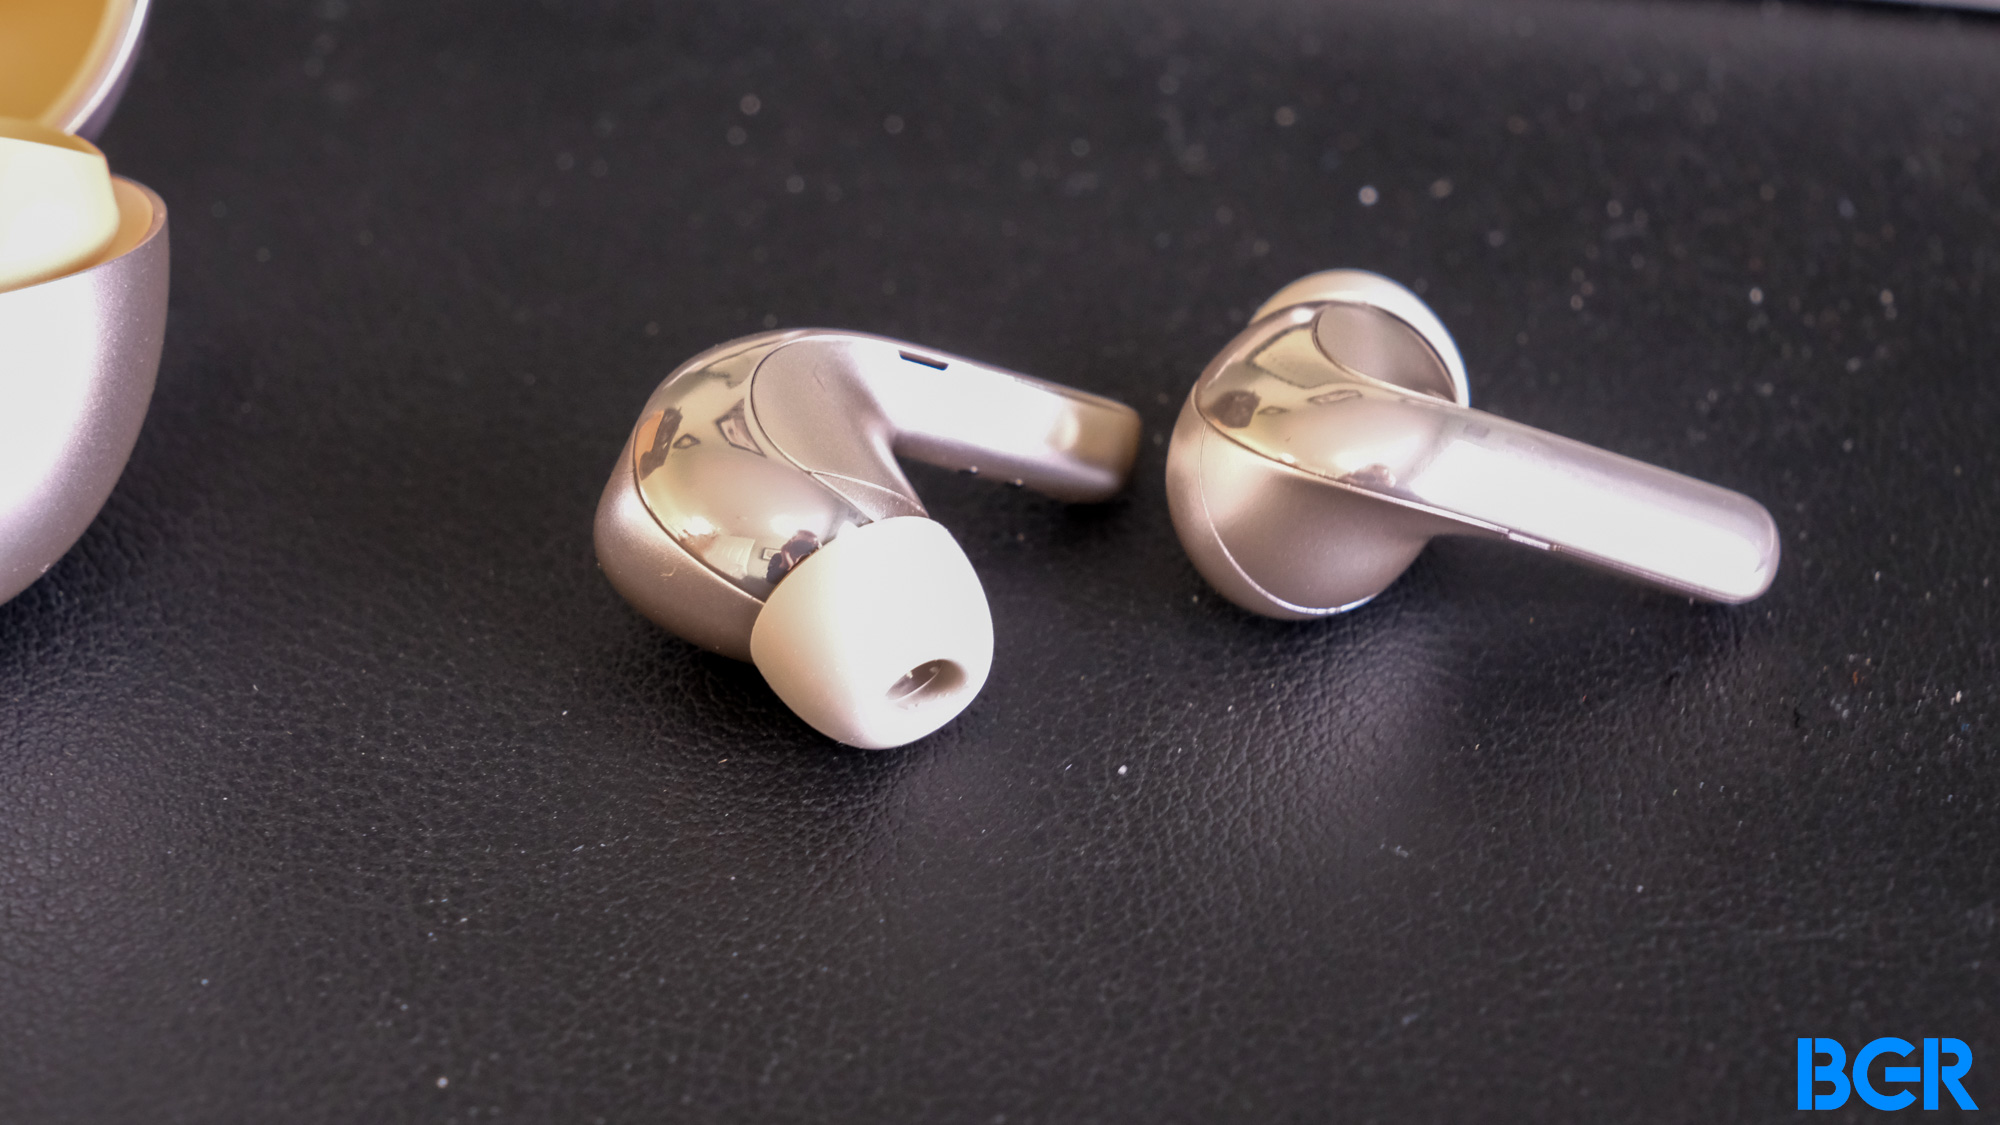 Shiny Xiaomi Buds 4 Pro come inside their own Space Capsule